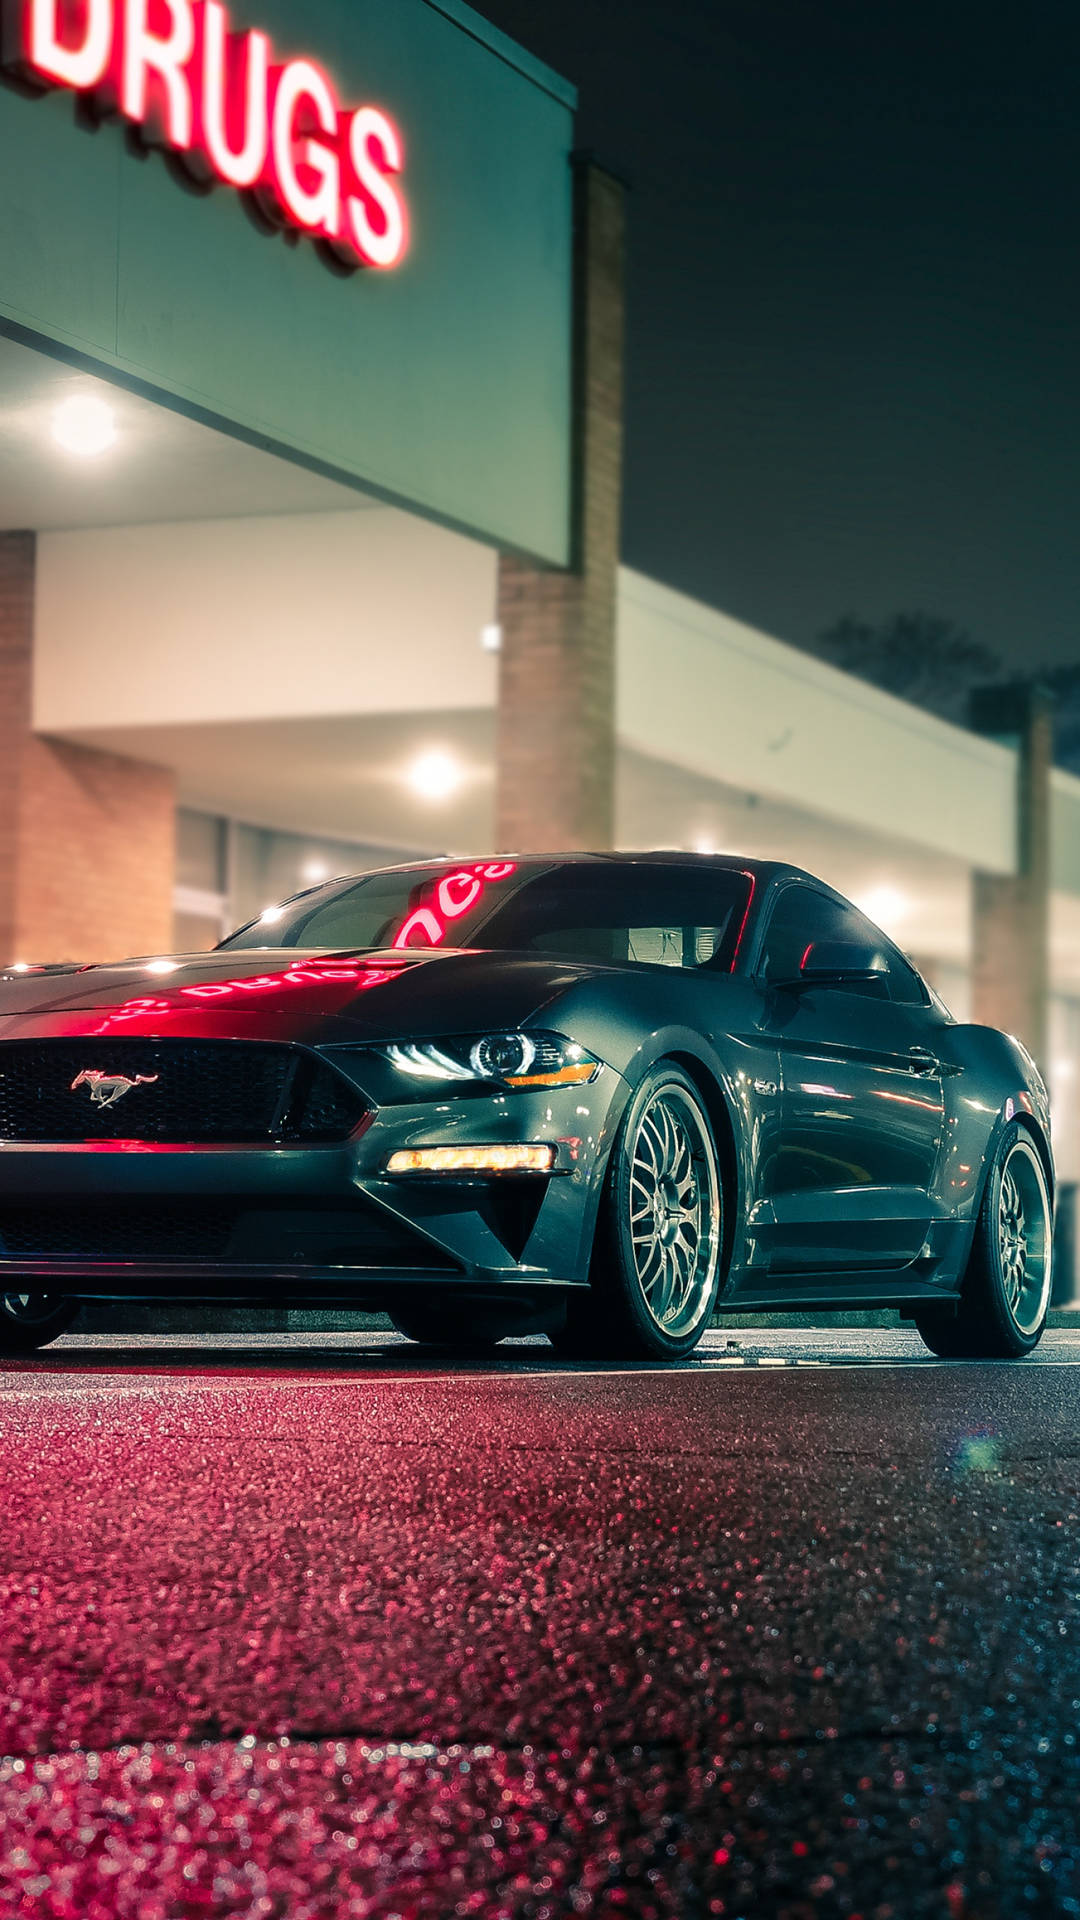 "Speed, style and power - this is the Cool Mustang" Wallpaper